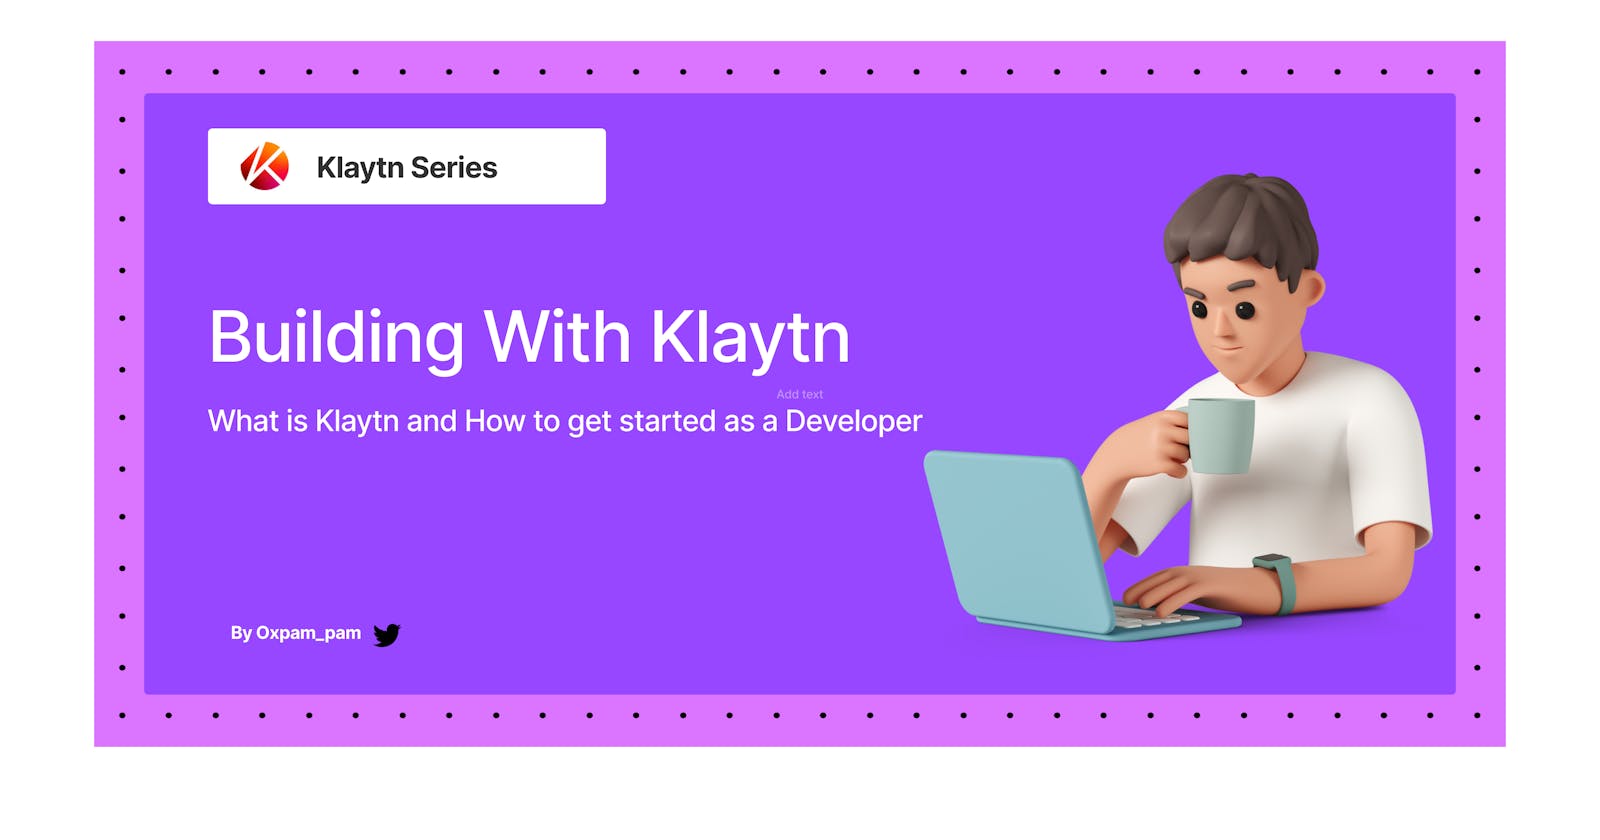 Building With Klaytn: What is Klaytn and how to get started as a Developer